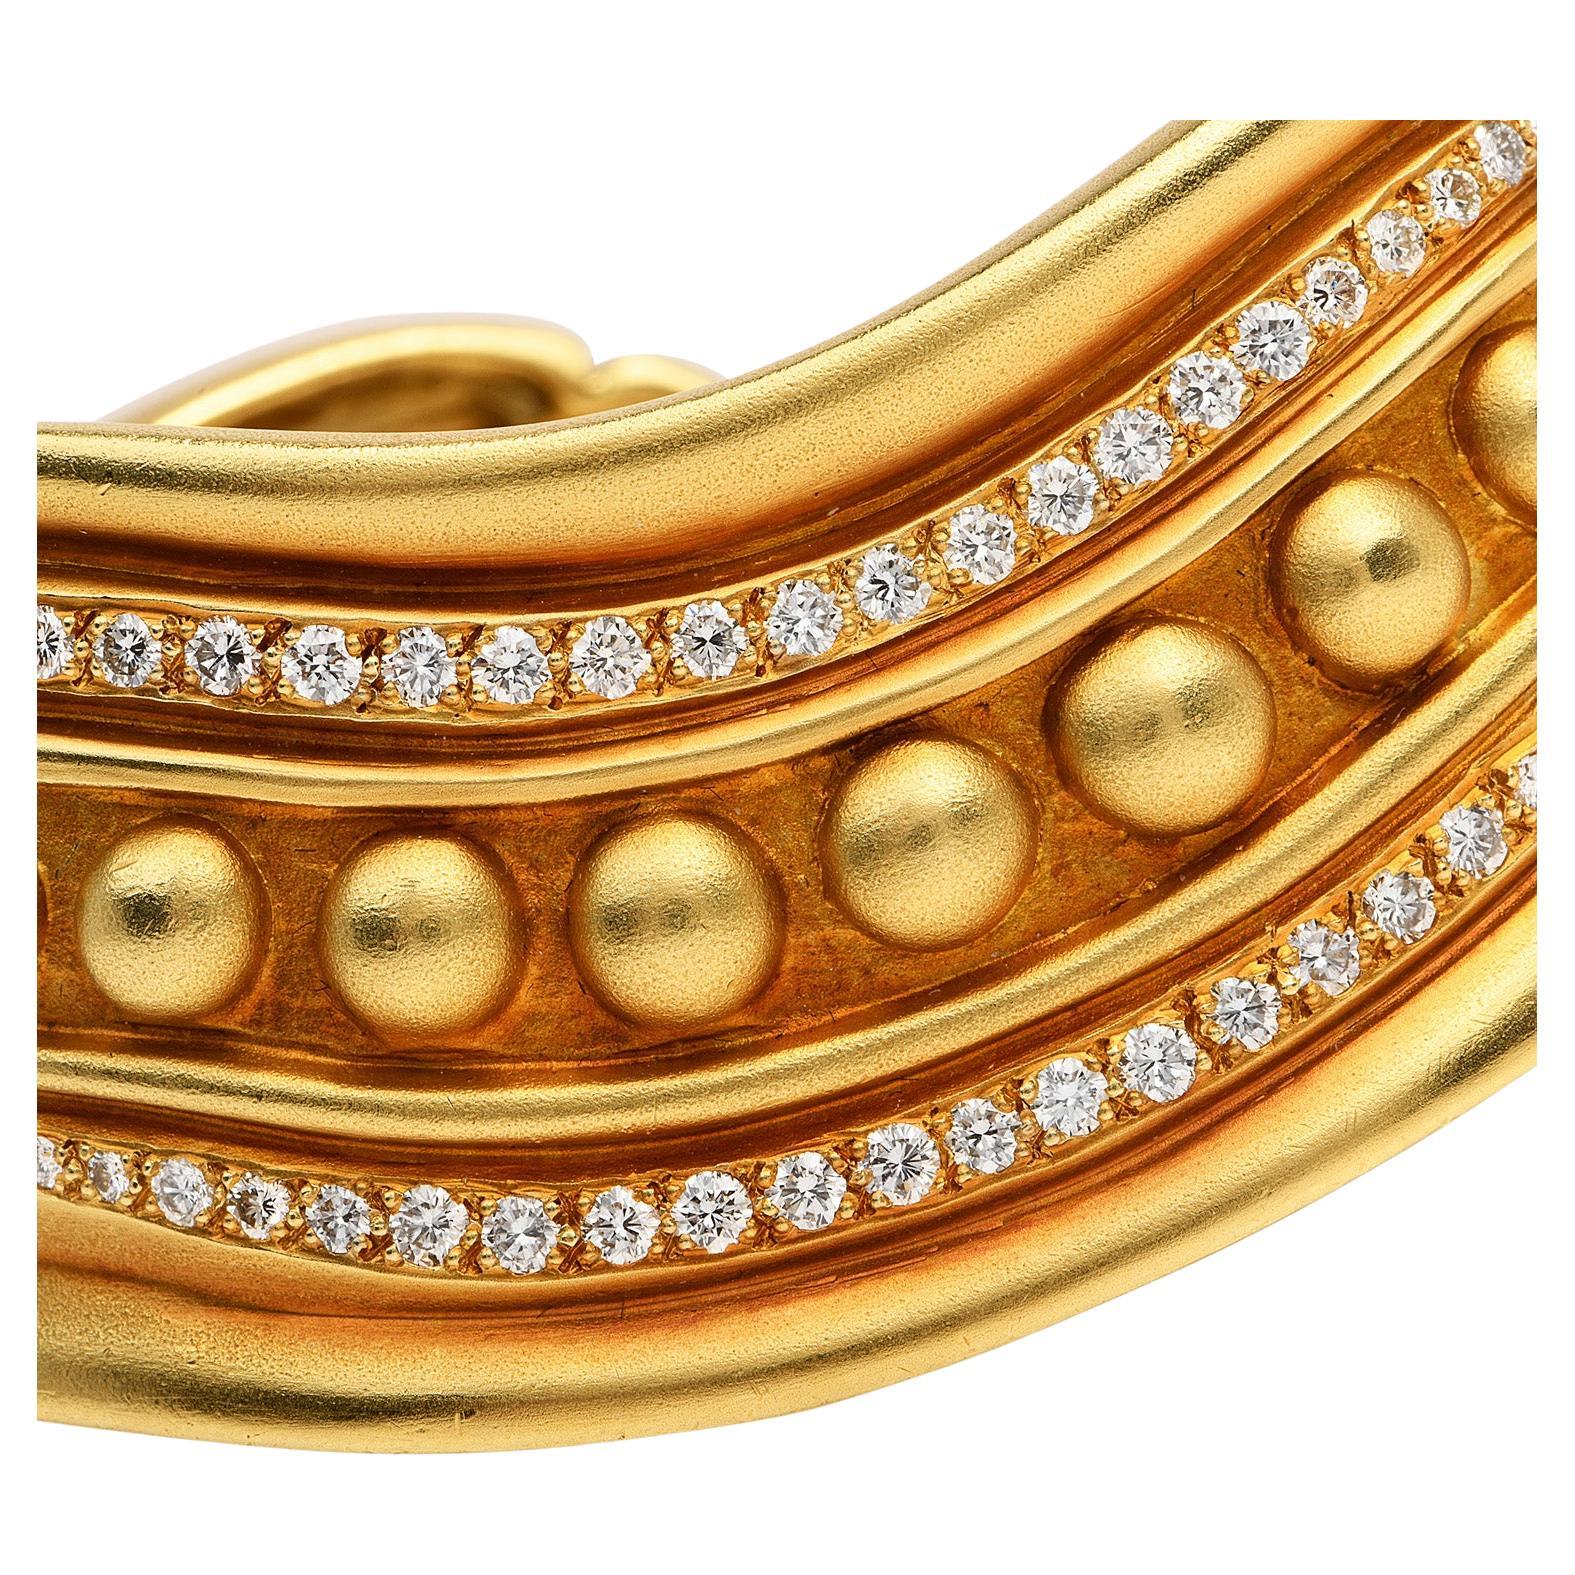 Designer Vahe Naltchayan 1980s piece wide opulent cuff bracelet,

Crafted in solid heavy 18K yellow gold, its center composed by (96) graduated style round-cut, prong-set, Diamonds weighing approximately 3.00carats (F-G color and VVSclarity)

The